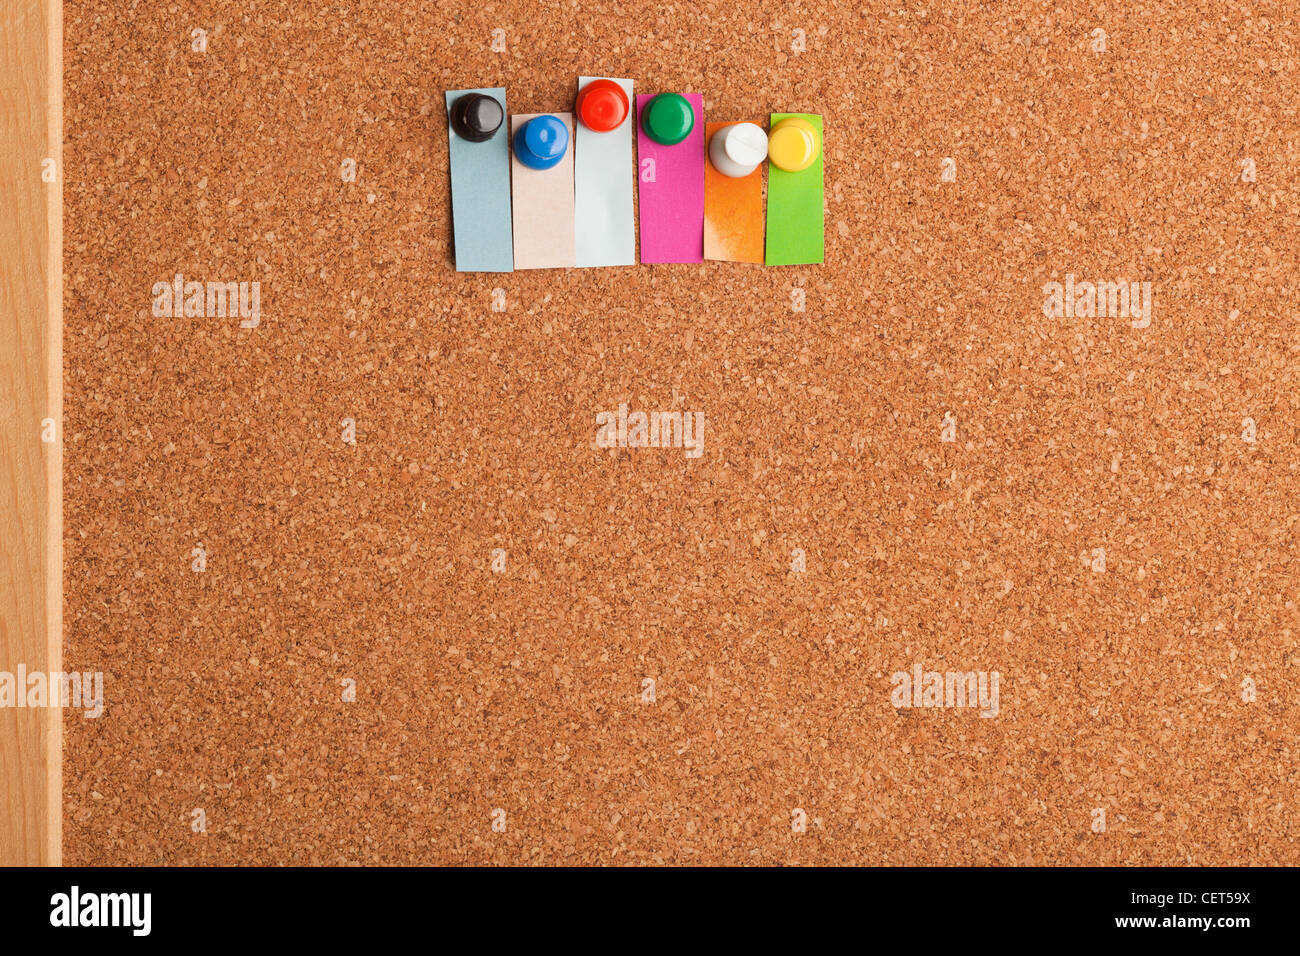 Cork board and colorful heading with copyspace for a six letter word Stock Photo